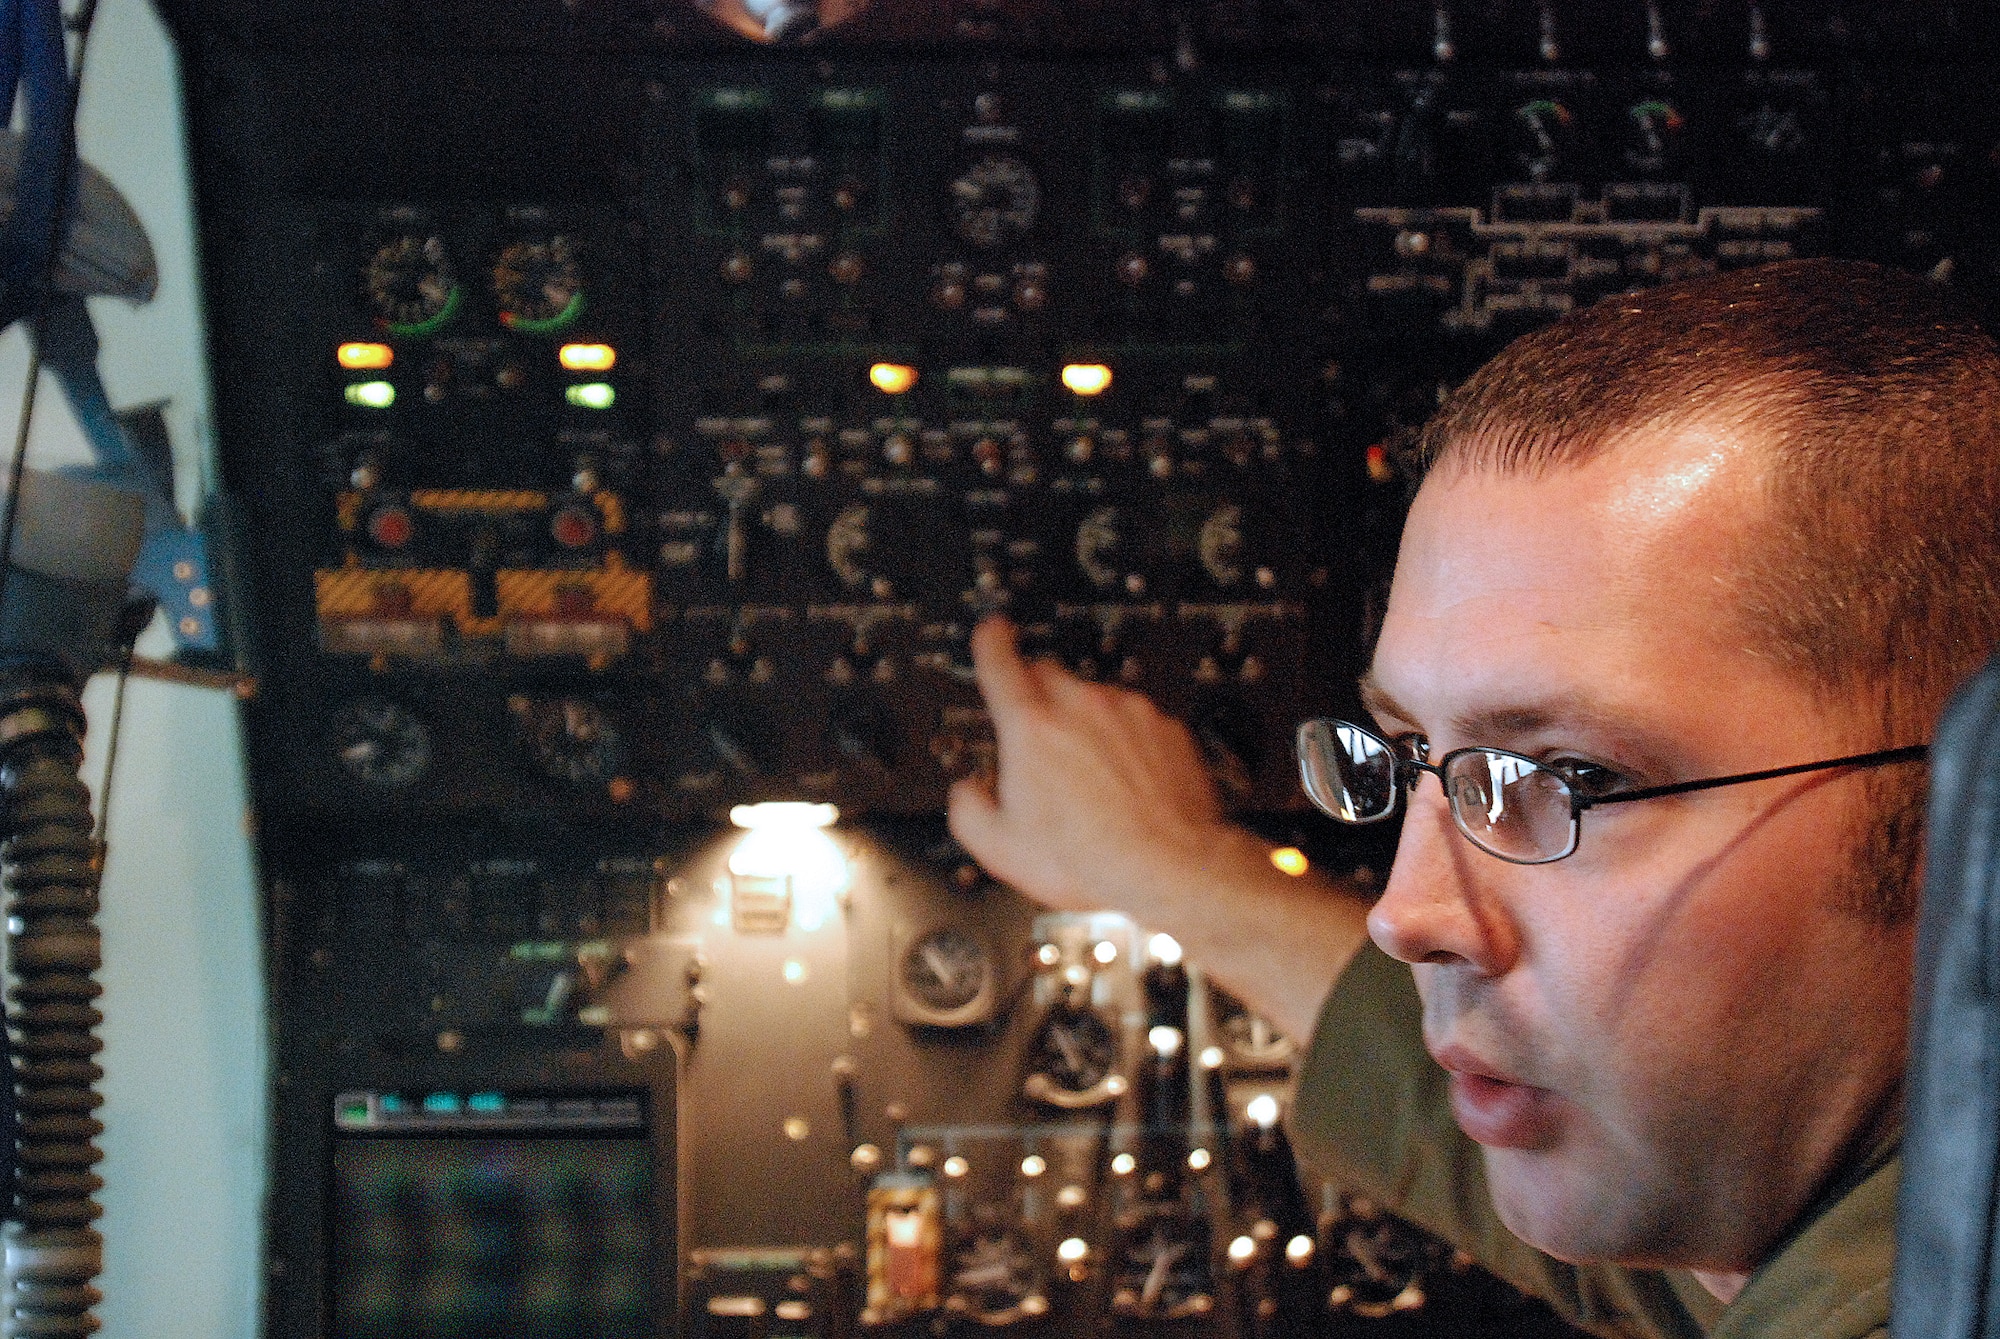 Instructors from the 356th Airlift Squadron, train C-5 pilots on the modernized avionics package installed in the C-5A Galaxy cargo aircraft as part of the Avionics Modernization Program. The Alamo Wing was the first C-5 unit to receive the upgrade for the A model. The AMP replaces analog avionics instruments with digital electronic equipment. The AMP program is just one way the Air Force is recapilizing its airlift fleet. (U.S. Air Force photo/Airman Brian McGloin)